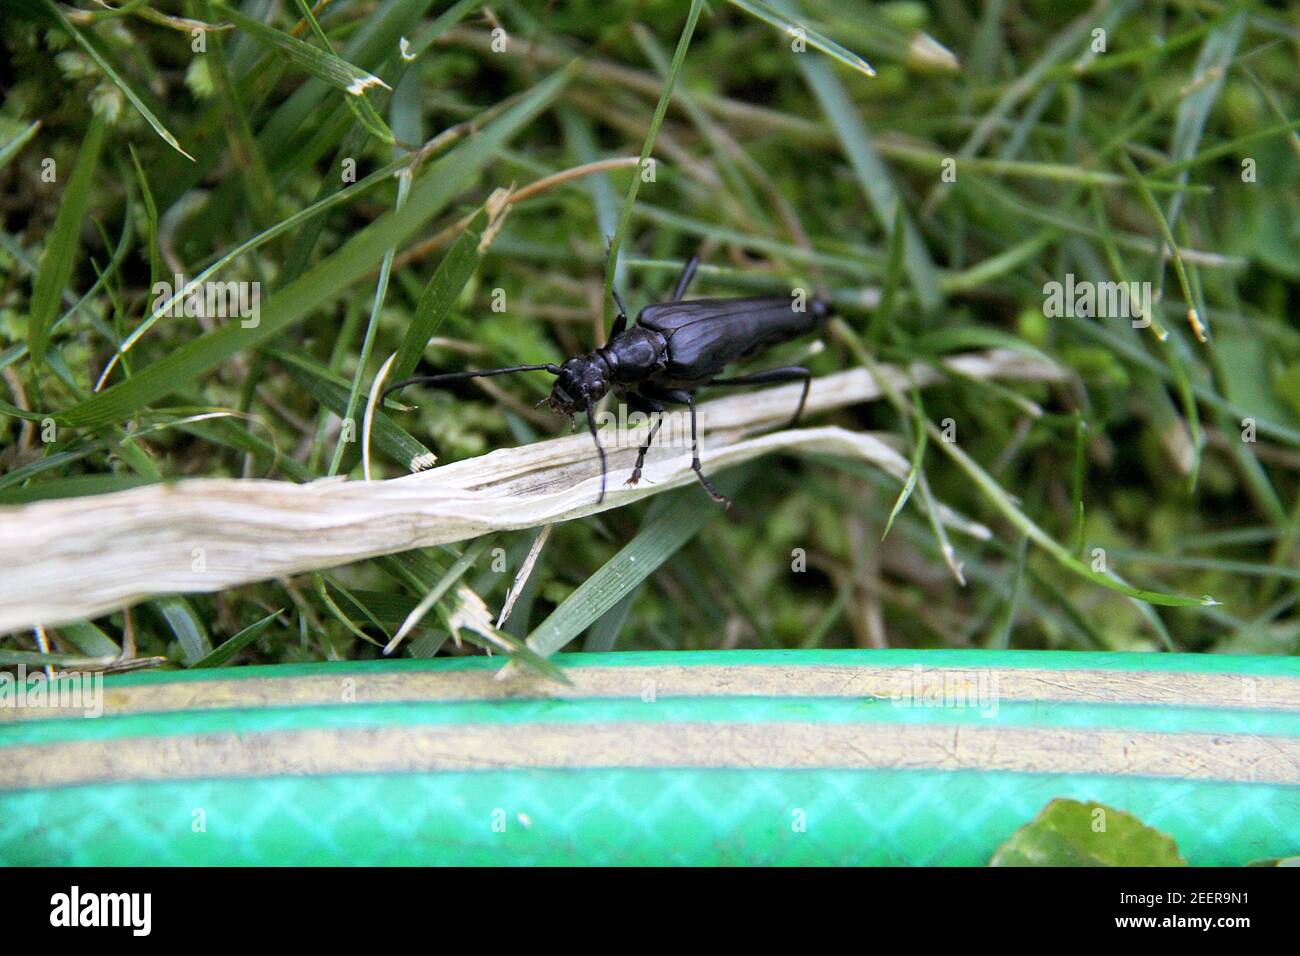 Black beetle with long body and antennae in Virginia, USA Stock Photo